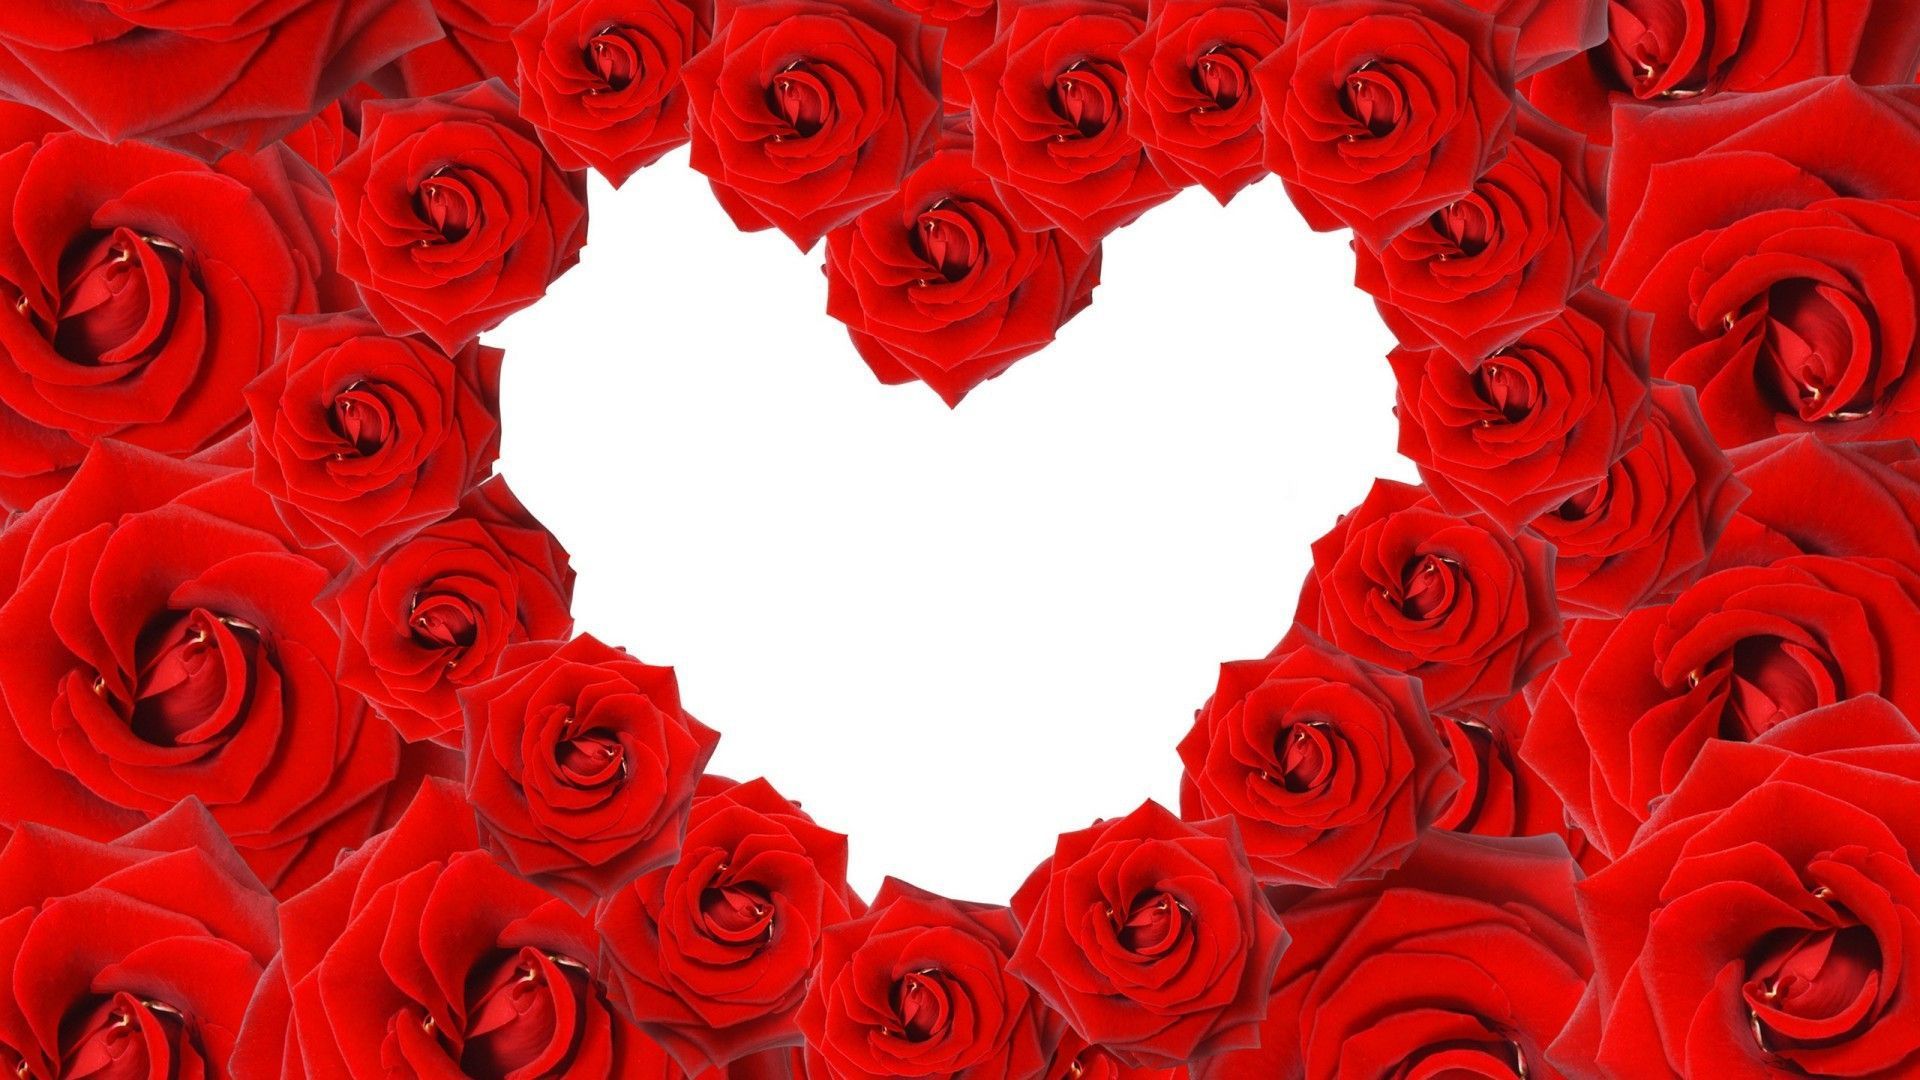 Red roses in a heart shape on white background wallpapers and ...